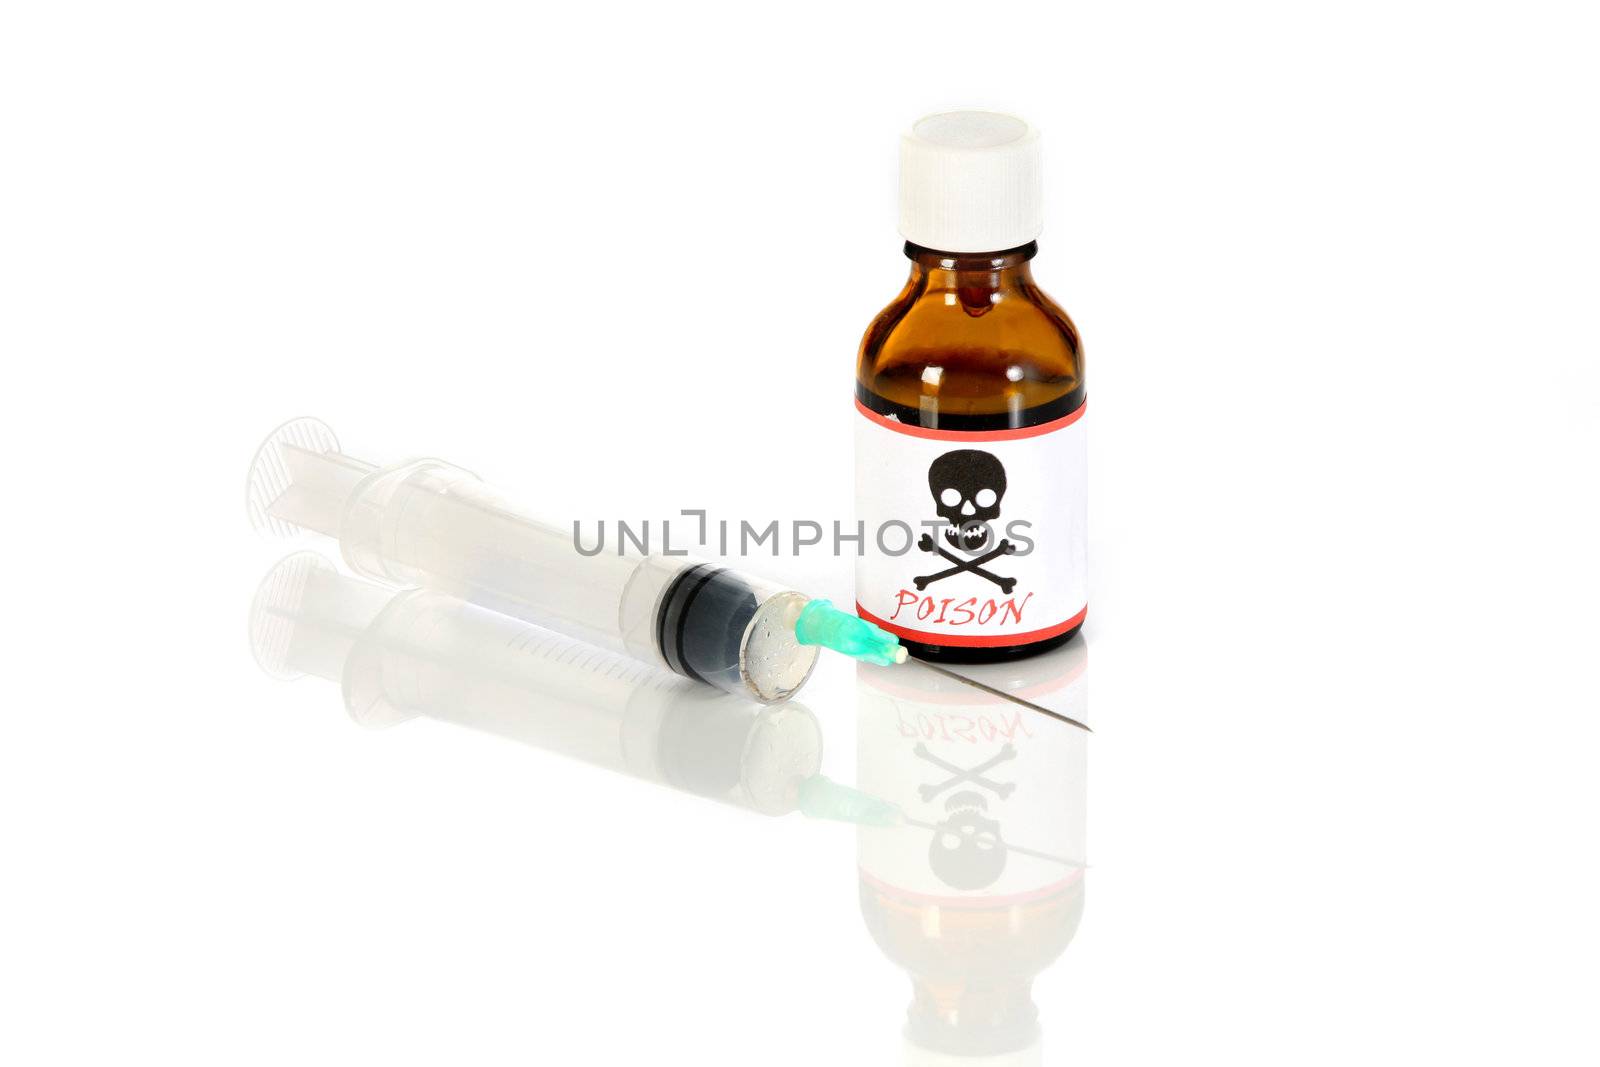 injection and poison bottle on white background